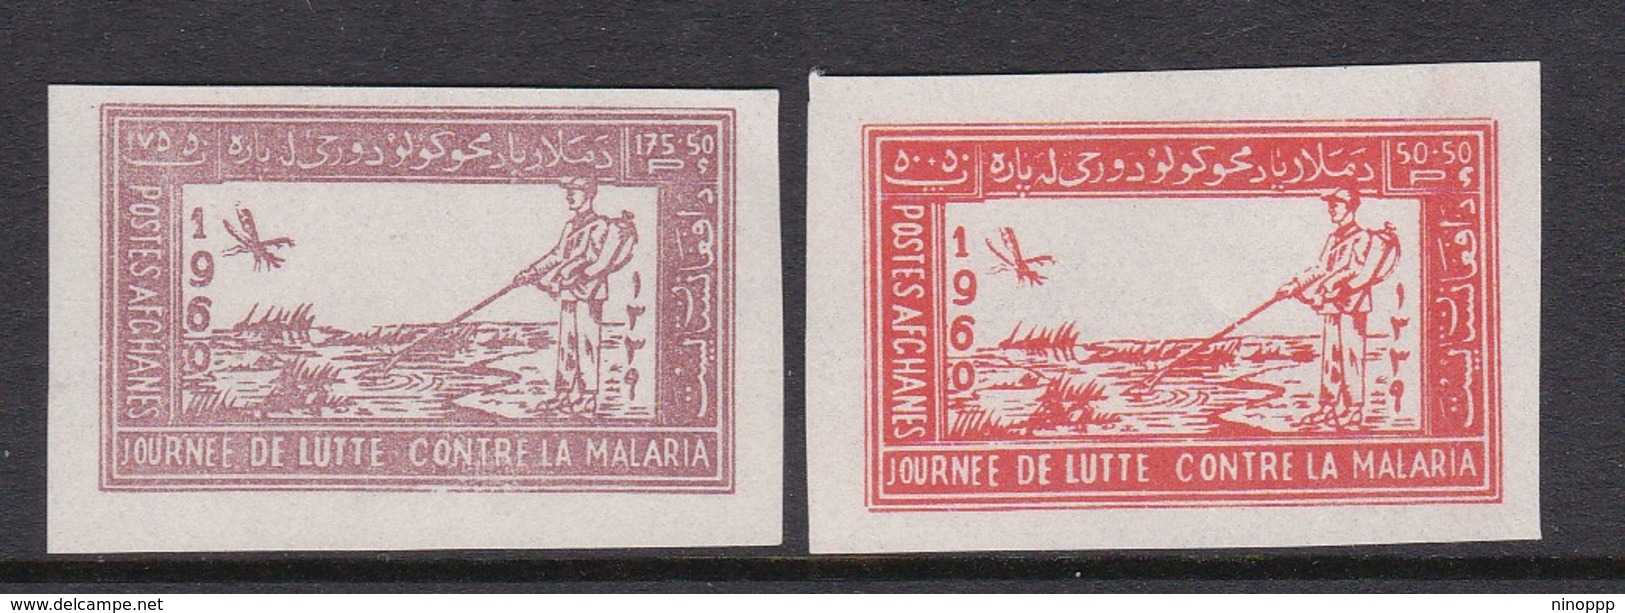 Afghanistan SG 474-475 1960 Anti Malaria Campaign Day Imperforated Set MNH - Afghanistan